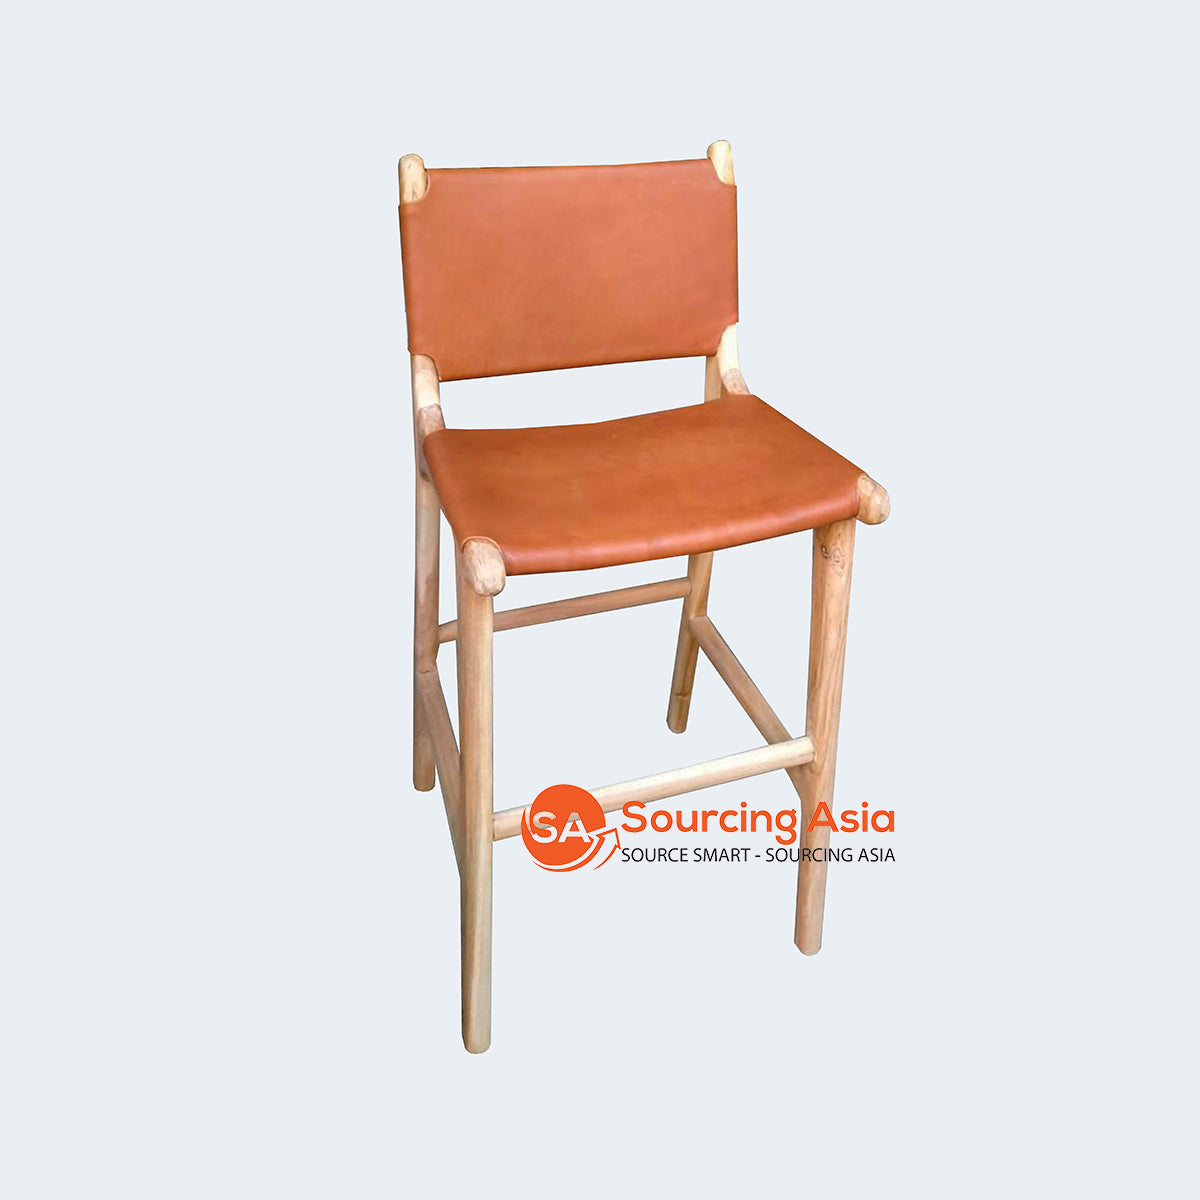 IJF001-9 BAR STOOL SEAT HIGH 65CM WITH LEATHER SEAT AND FULL BACK